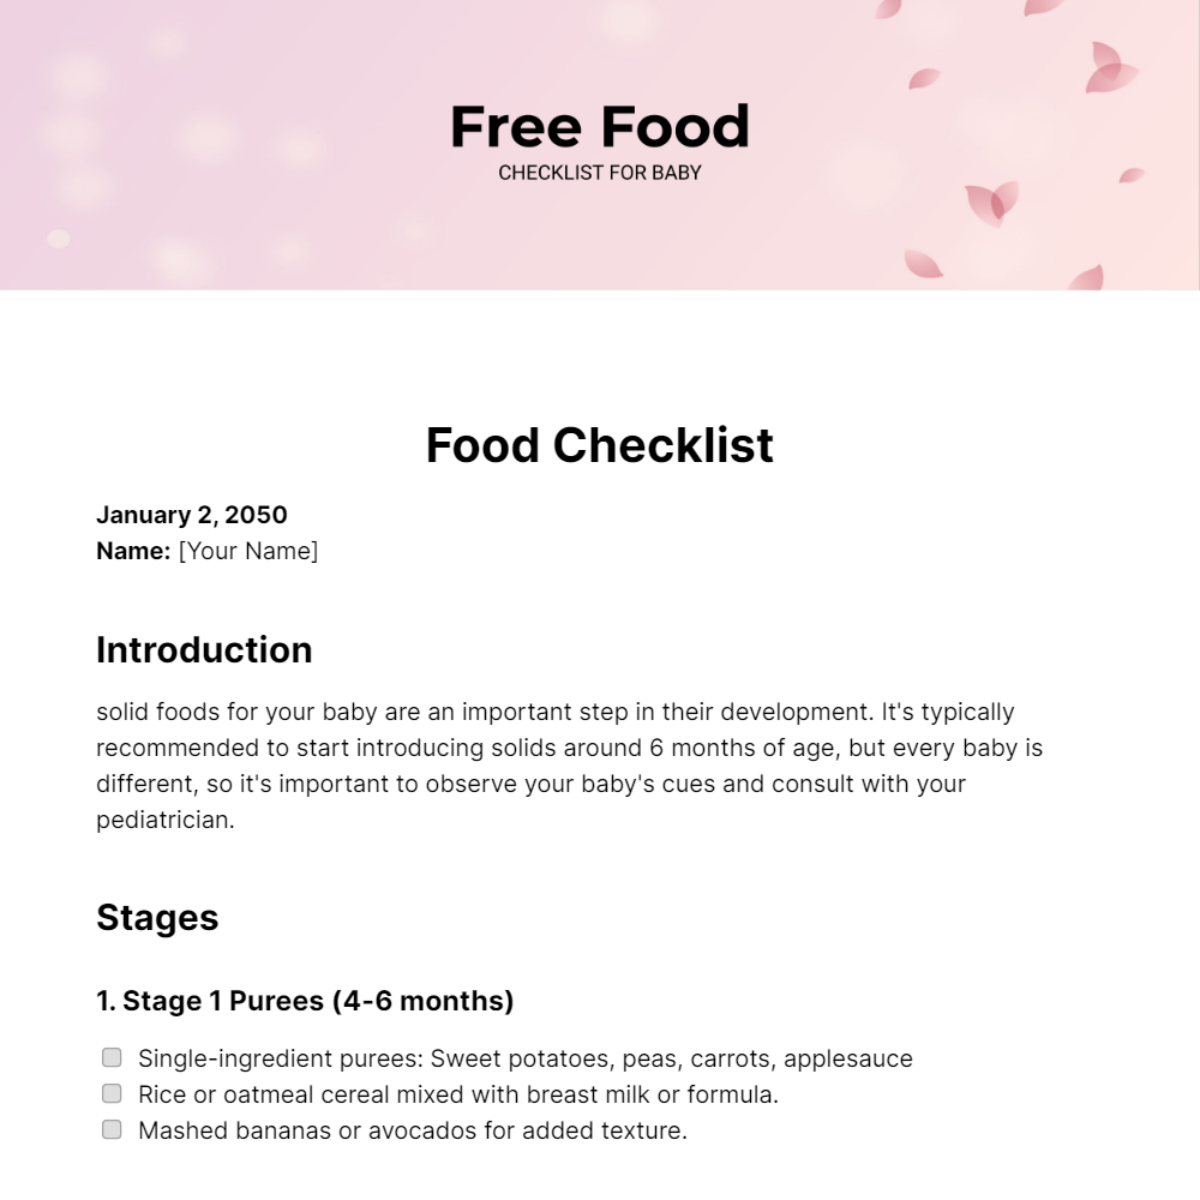 Free Food Checklist for Baby Template